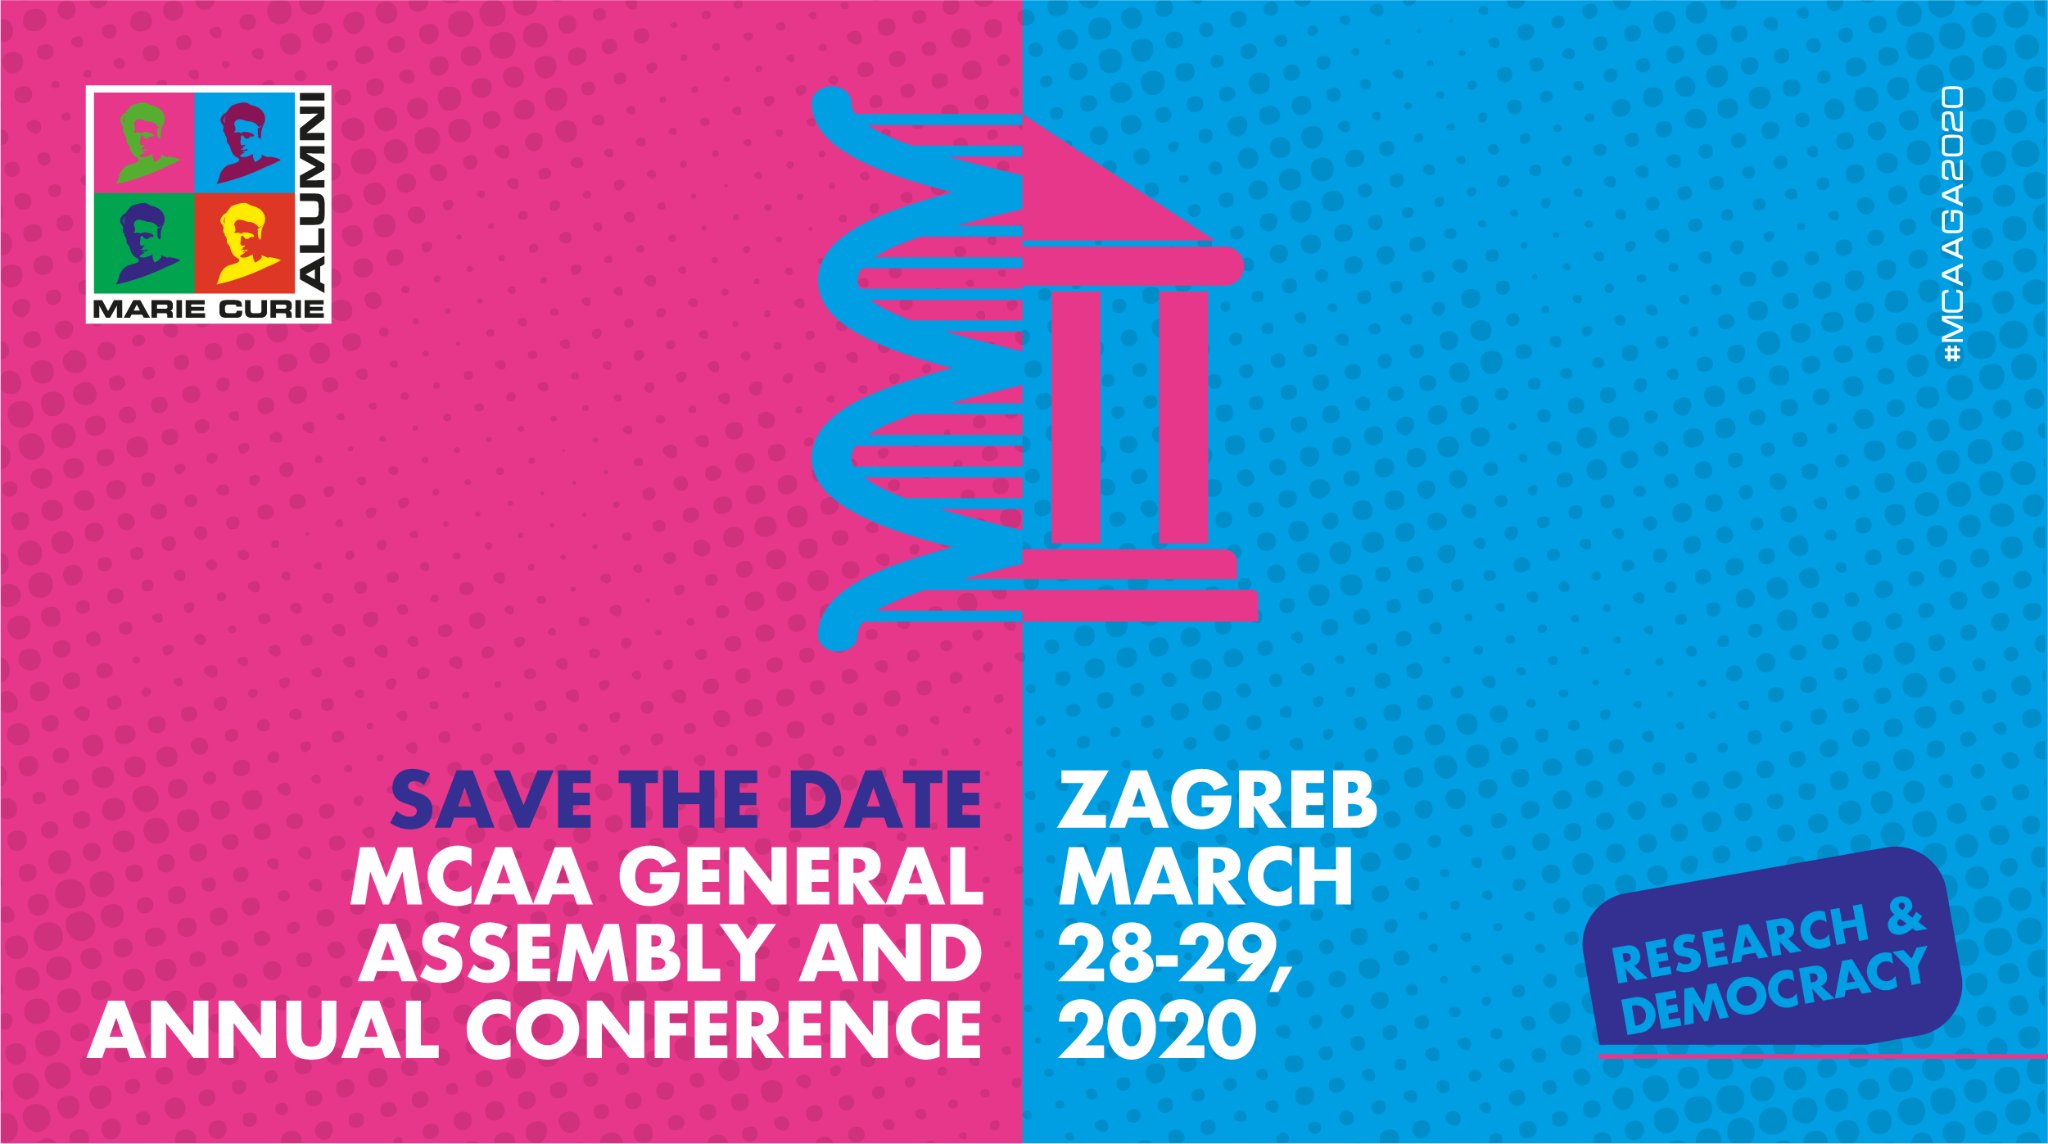 Registration to 7th MCAA General Assembly and Annual Conference is open